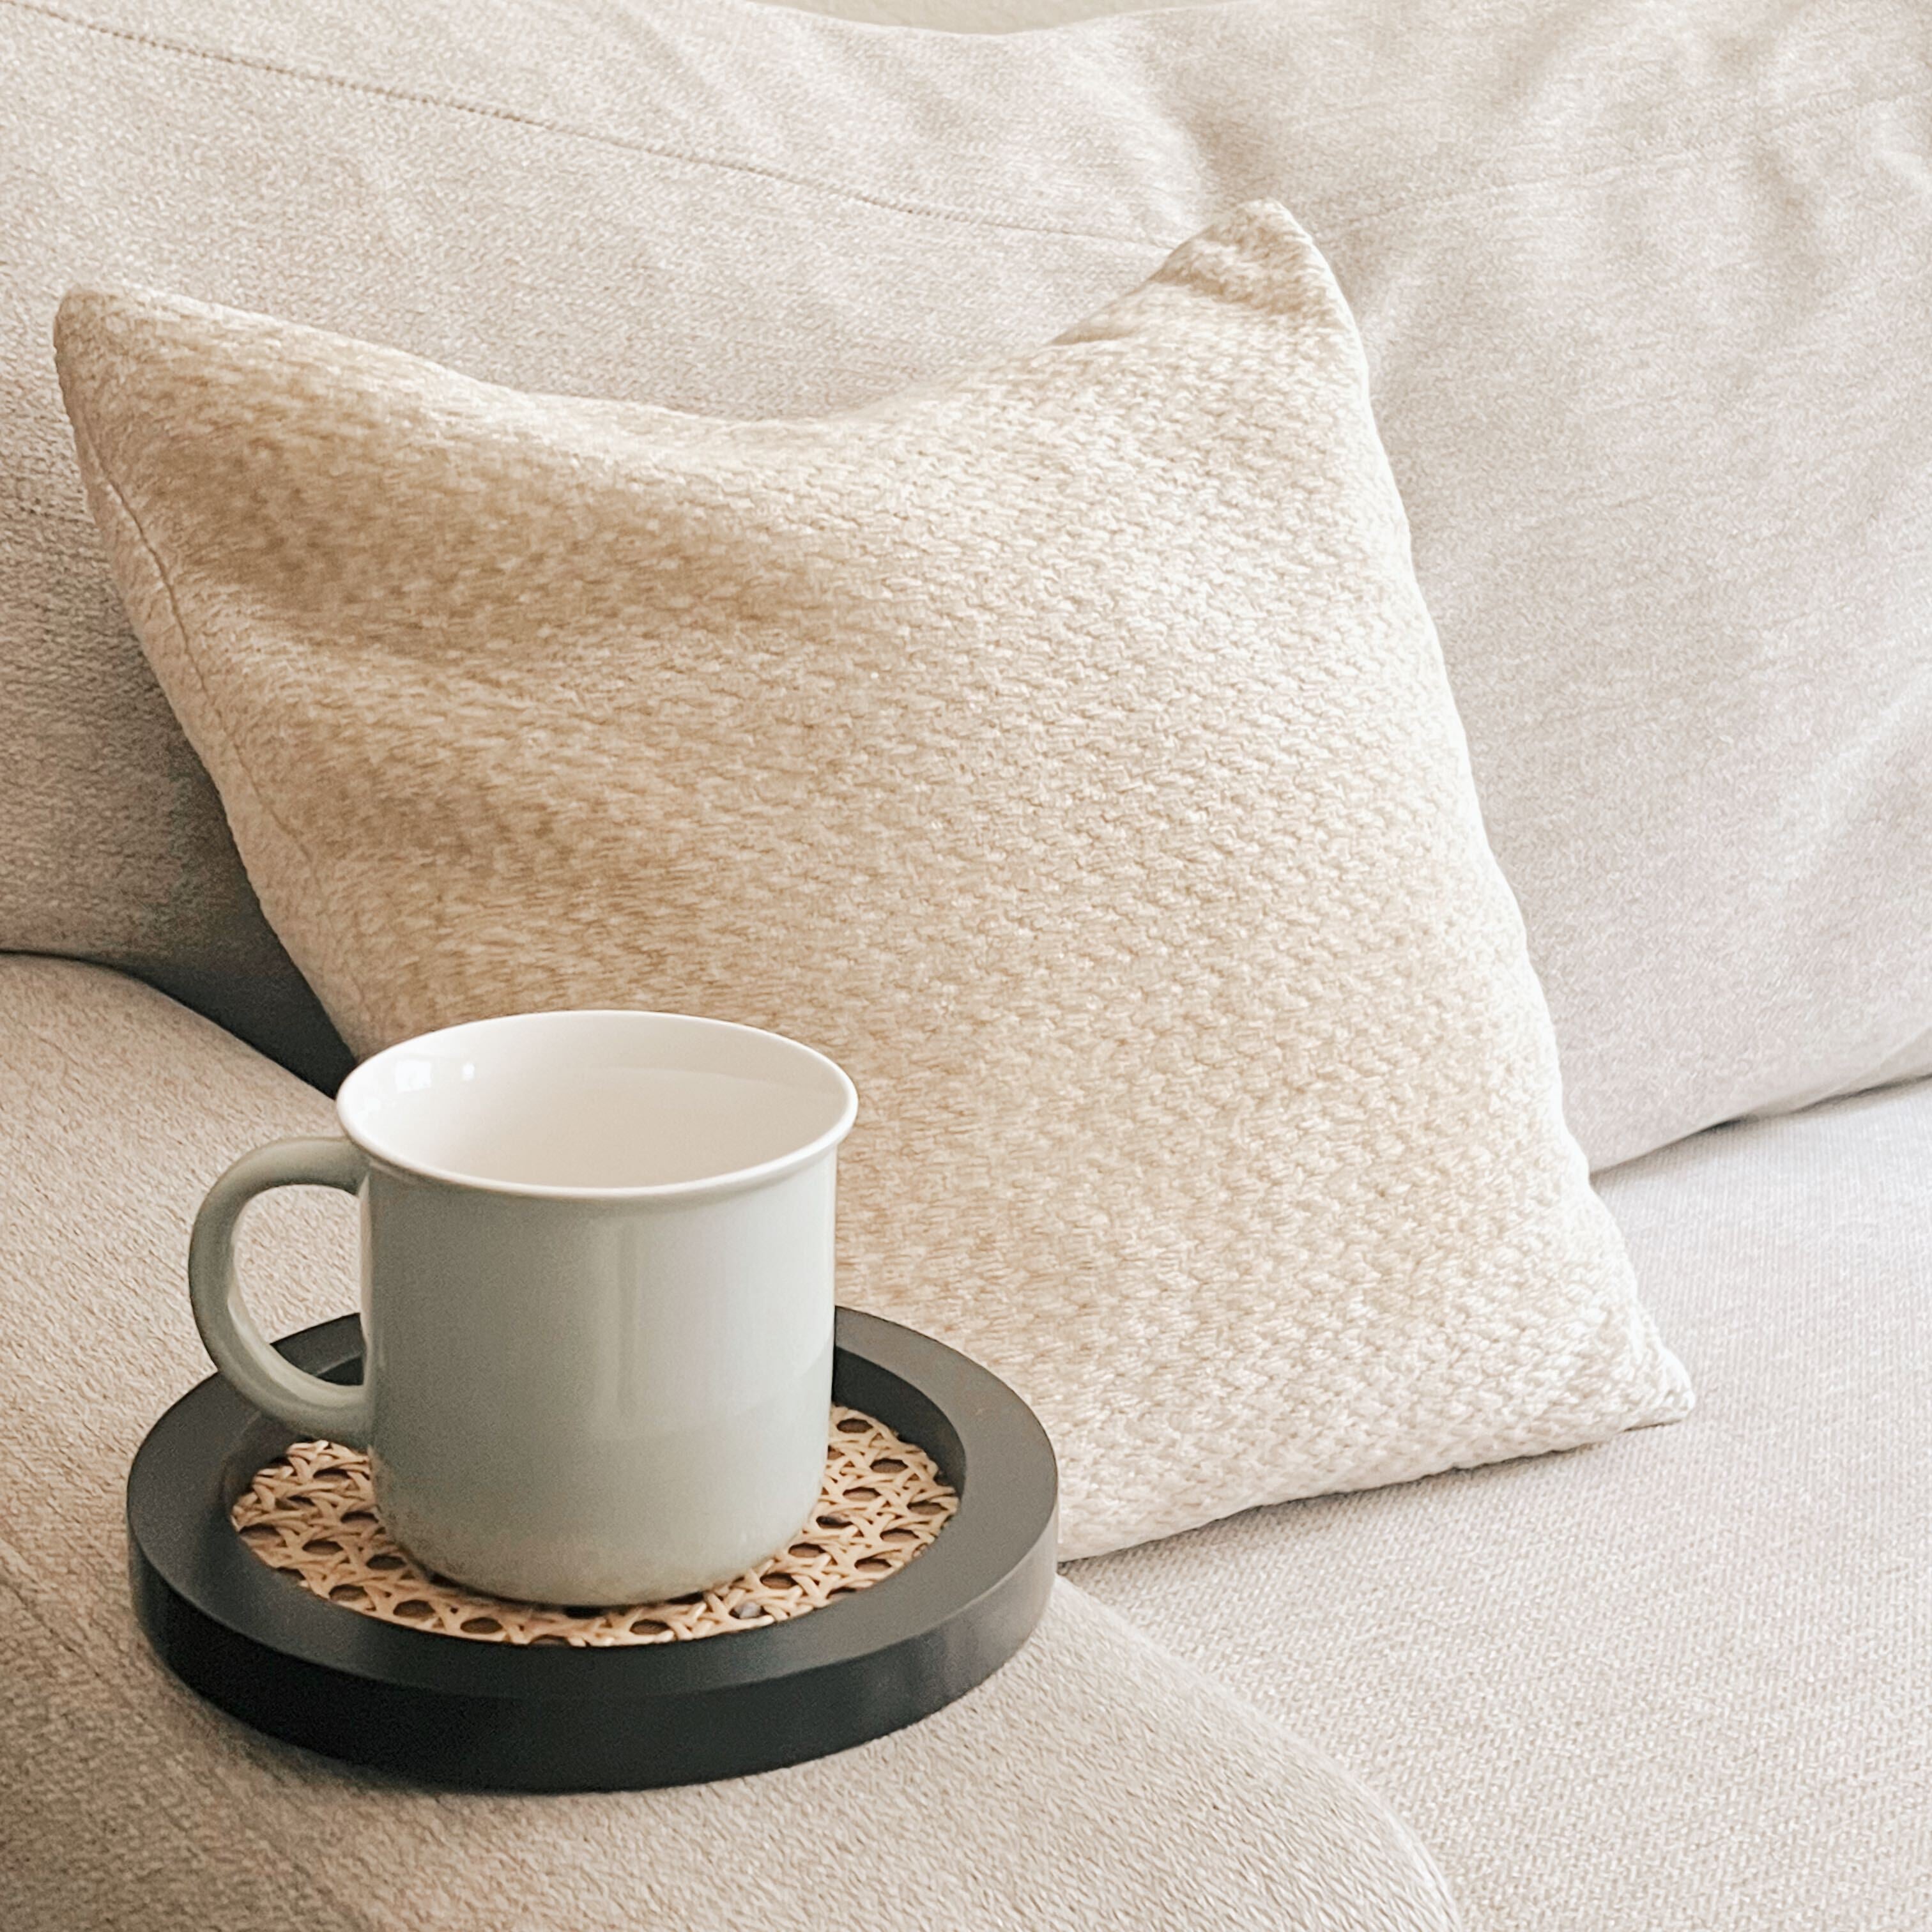 A black rattan cane tray holding a grey ceramic mug on the armrest of an oatmeal colored couch.